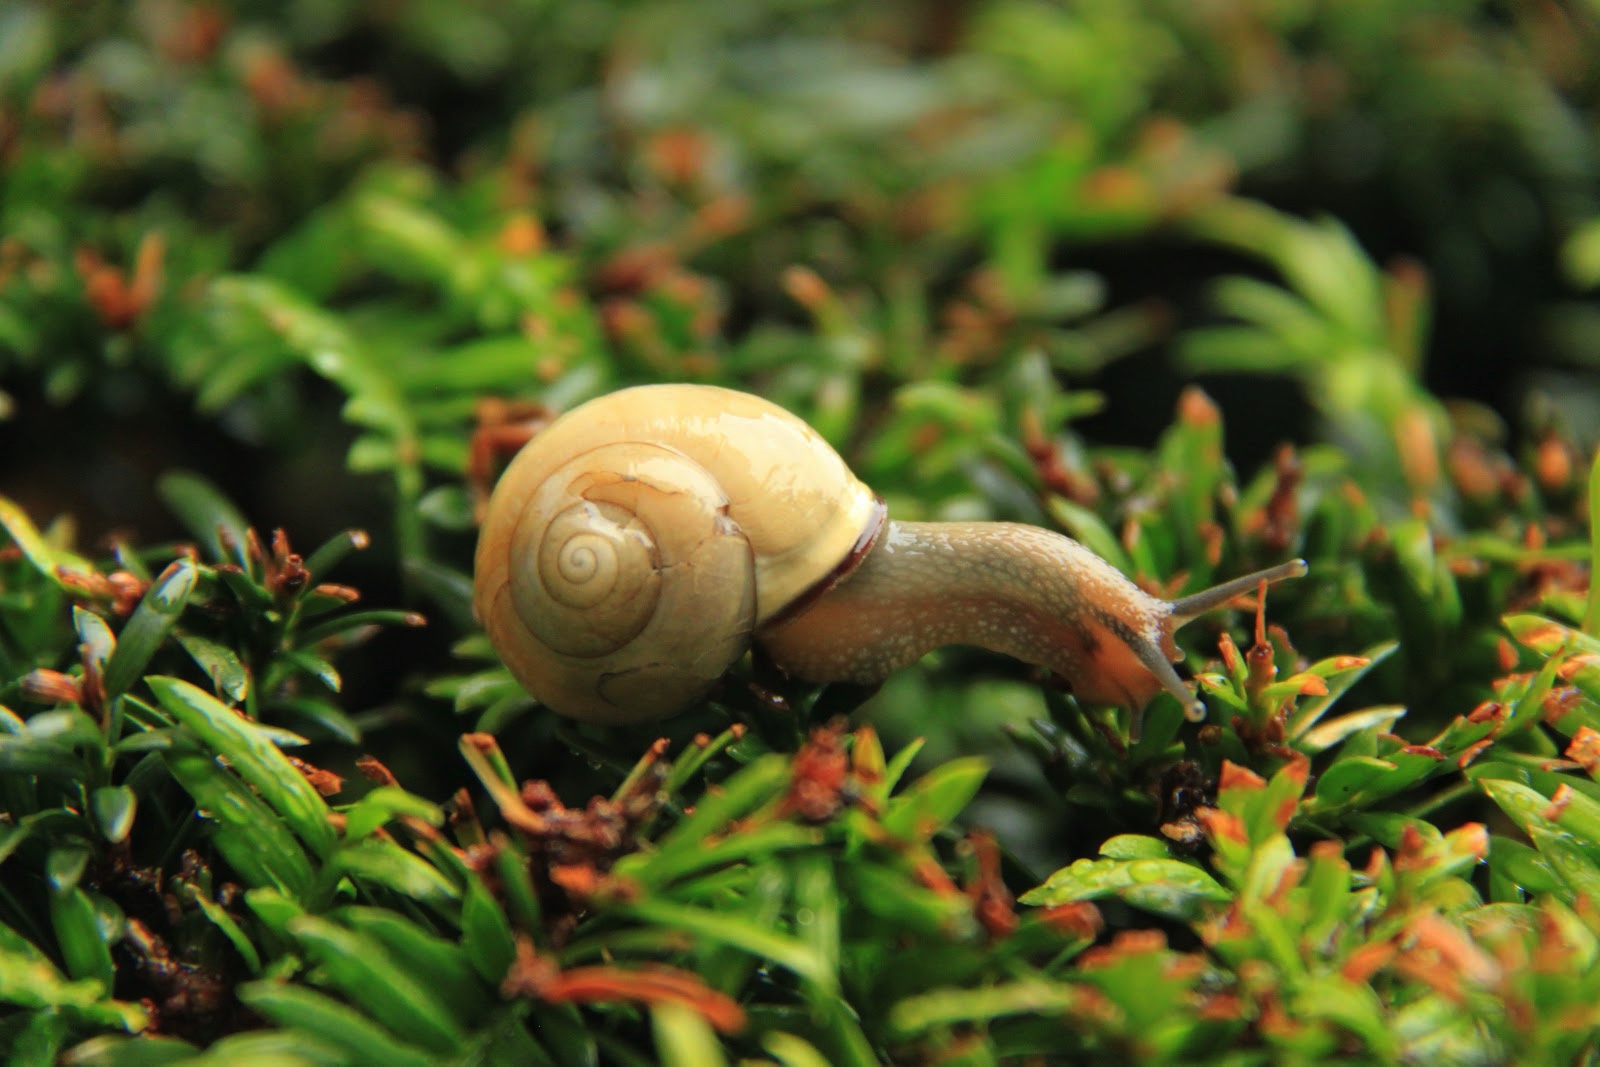 A snail explores some sprouting plants. Source: Cristian Bortes_Flickr_CC BY 2.0